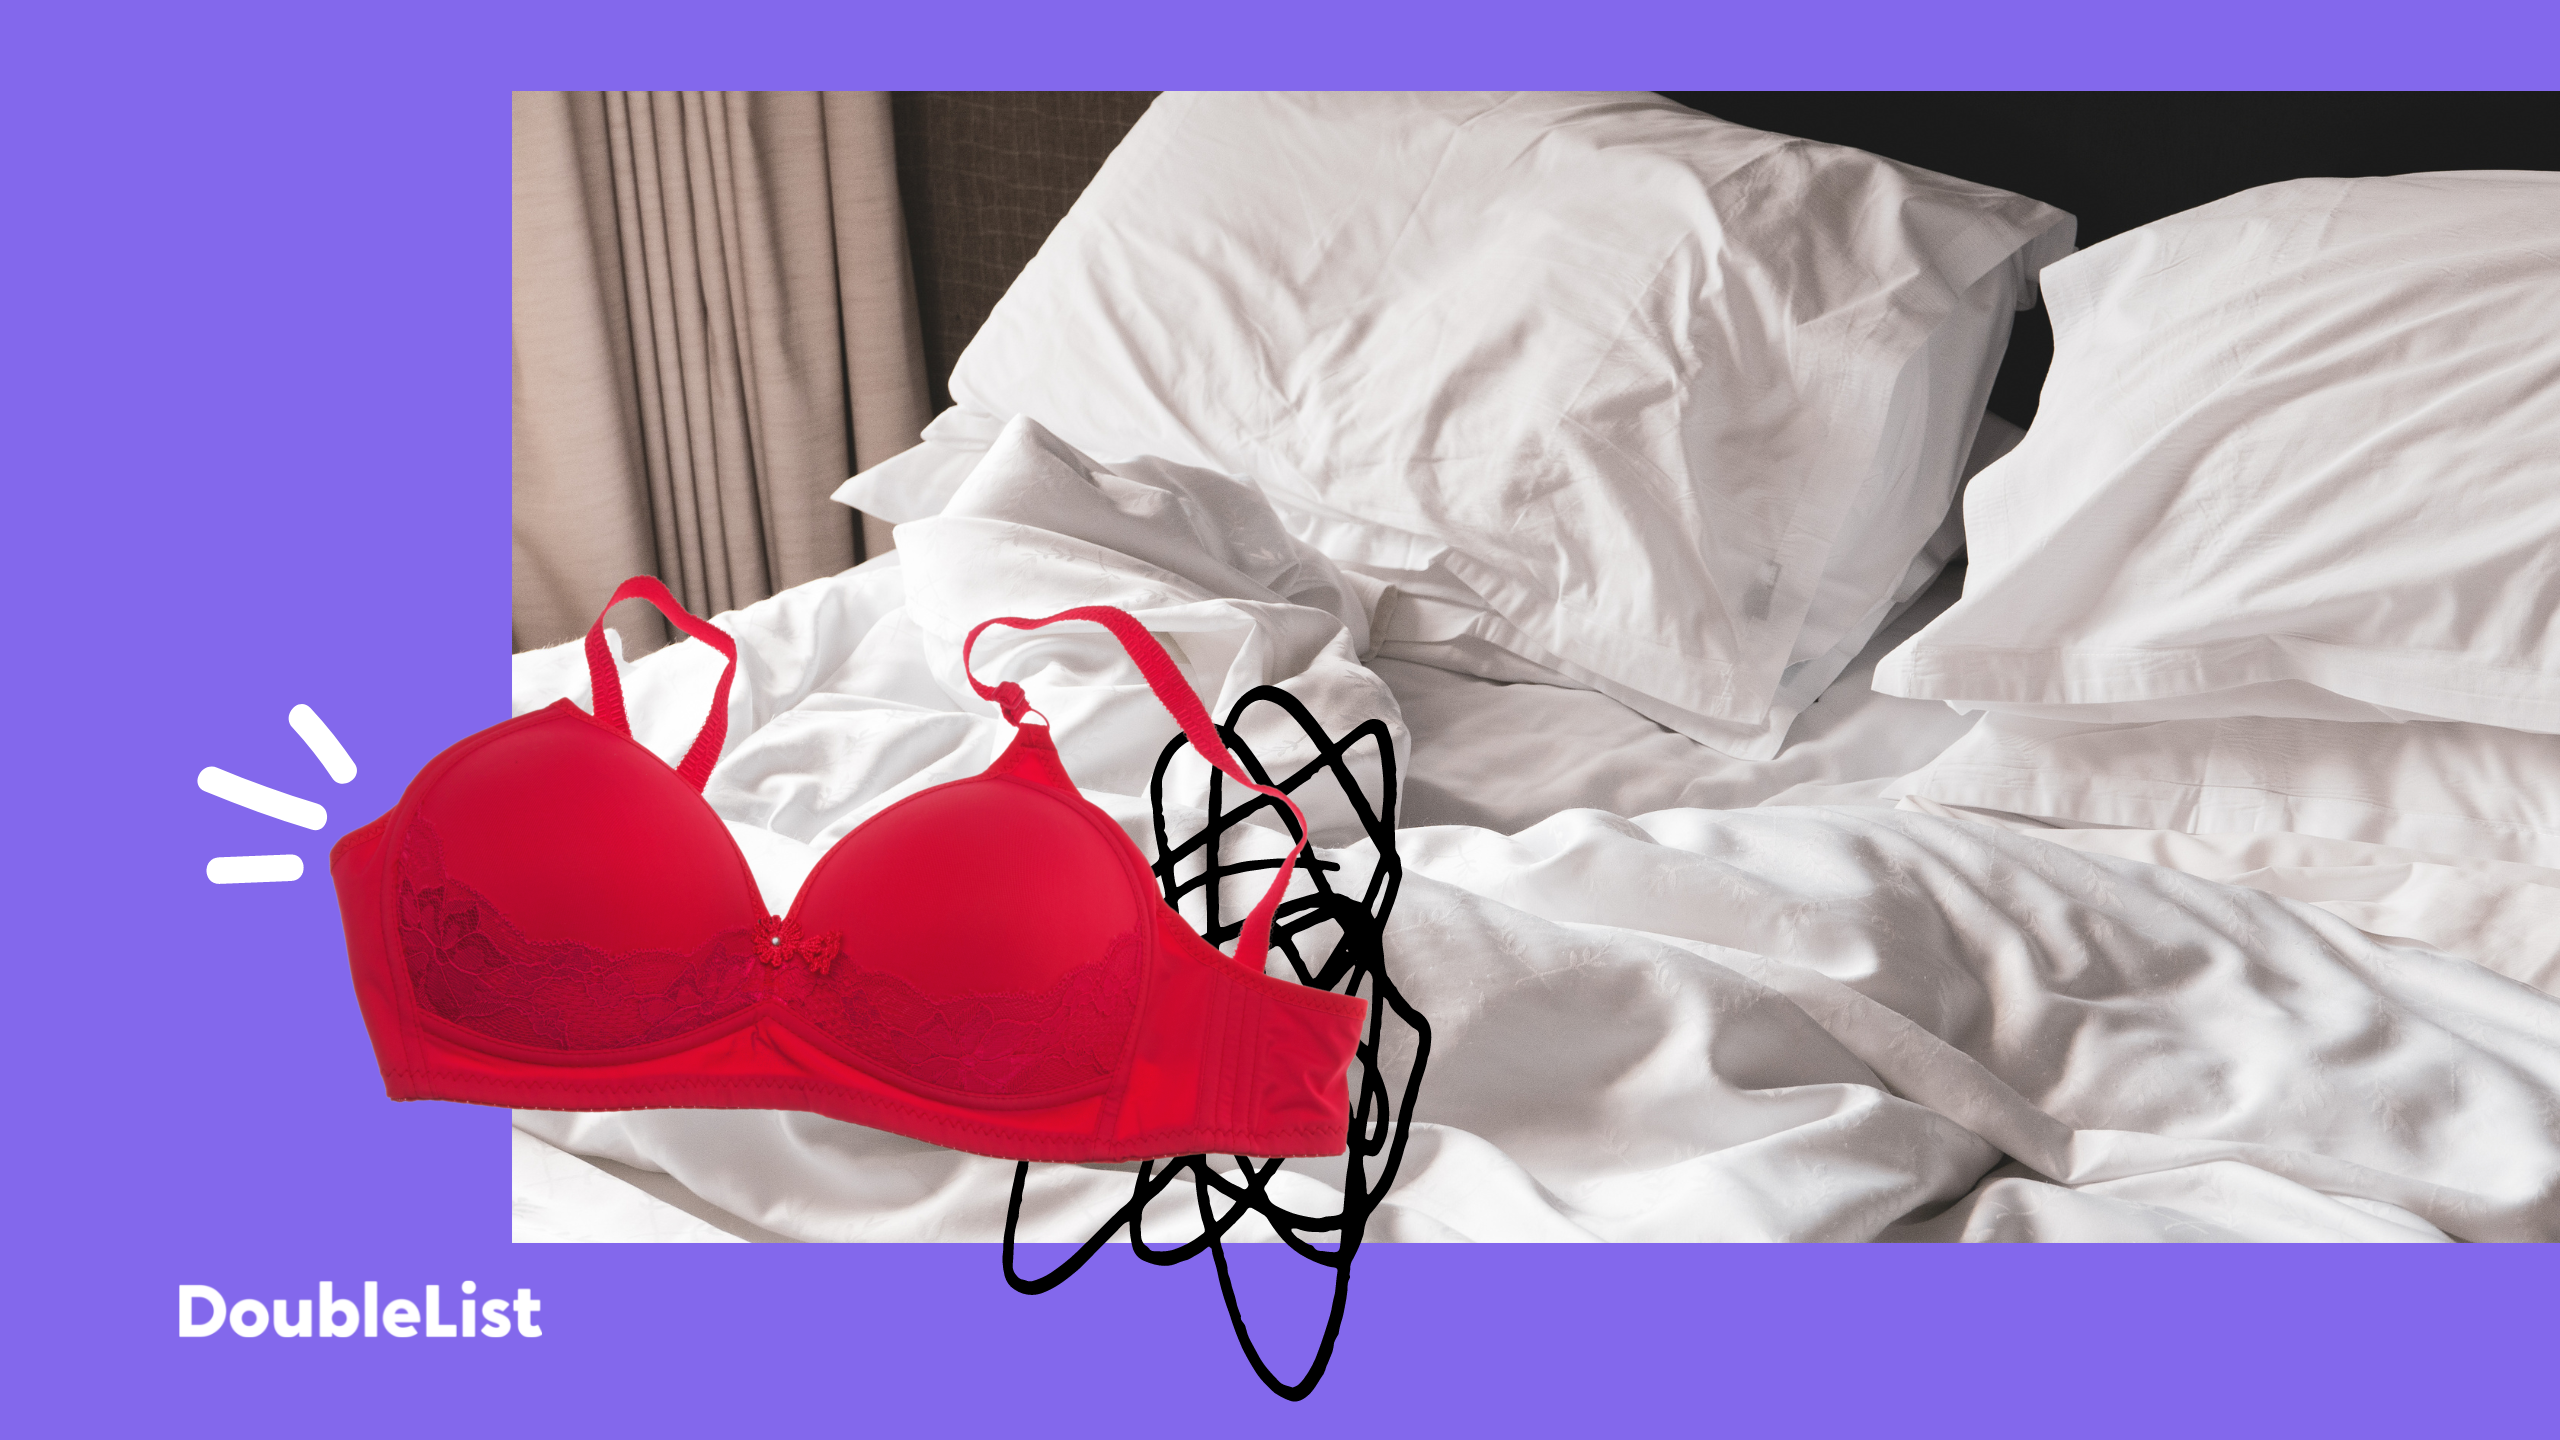 DoubleList graphic of a red bra overlaying black scribbles and an unmade bed symbolizing hookups and casual dating.